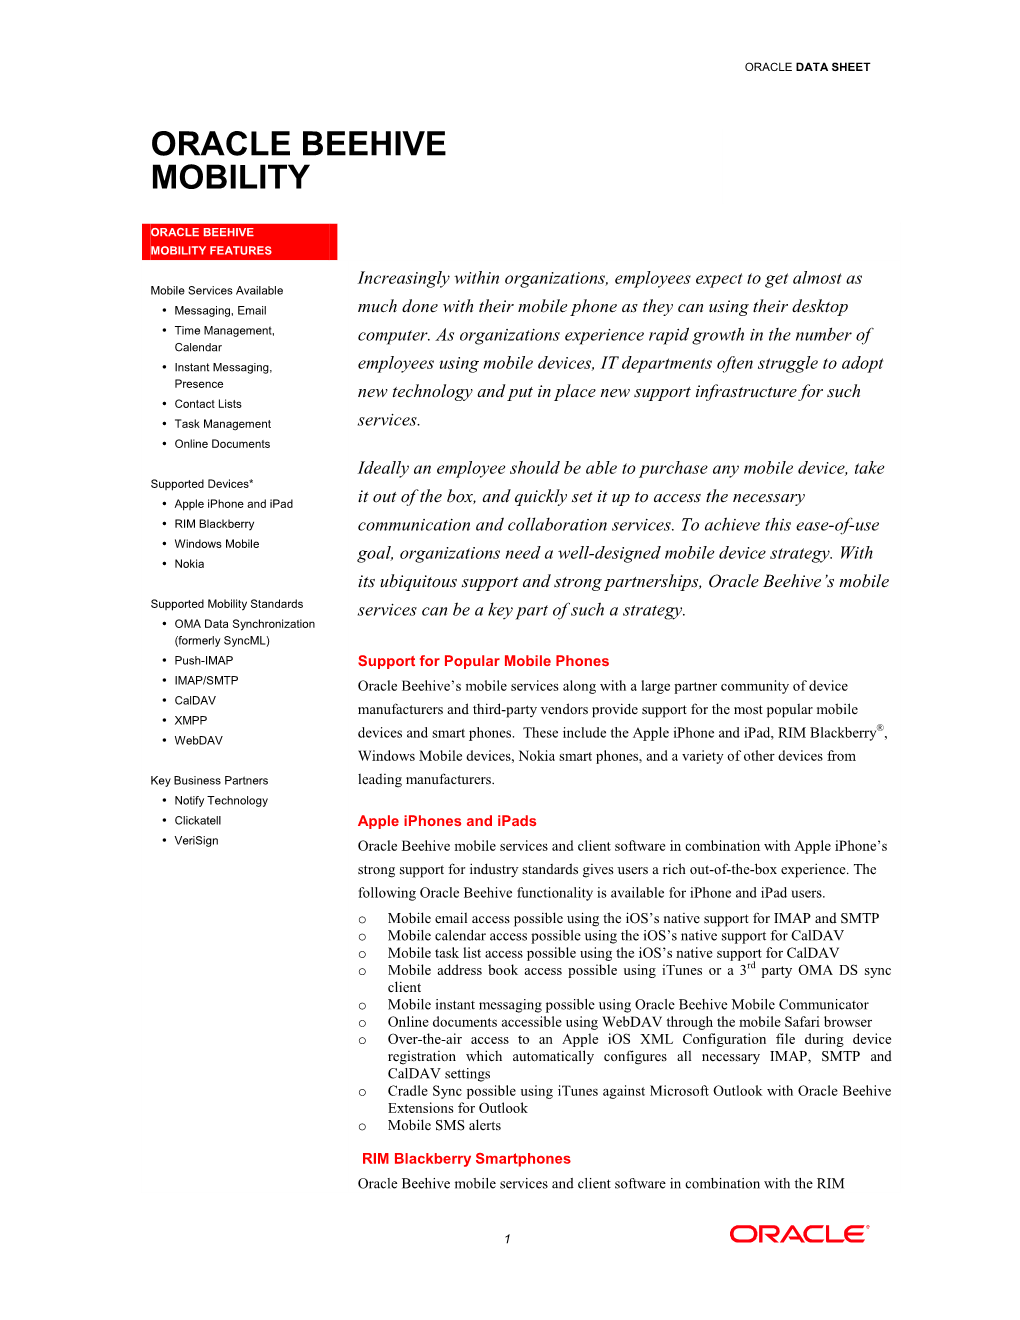 Oracle Beehive Mobility Data Sheet